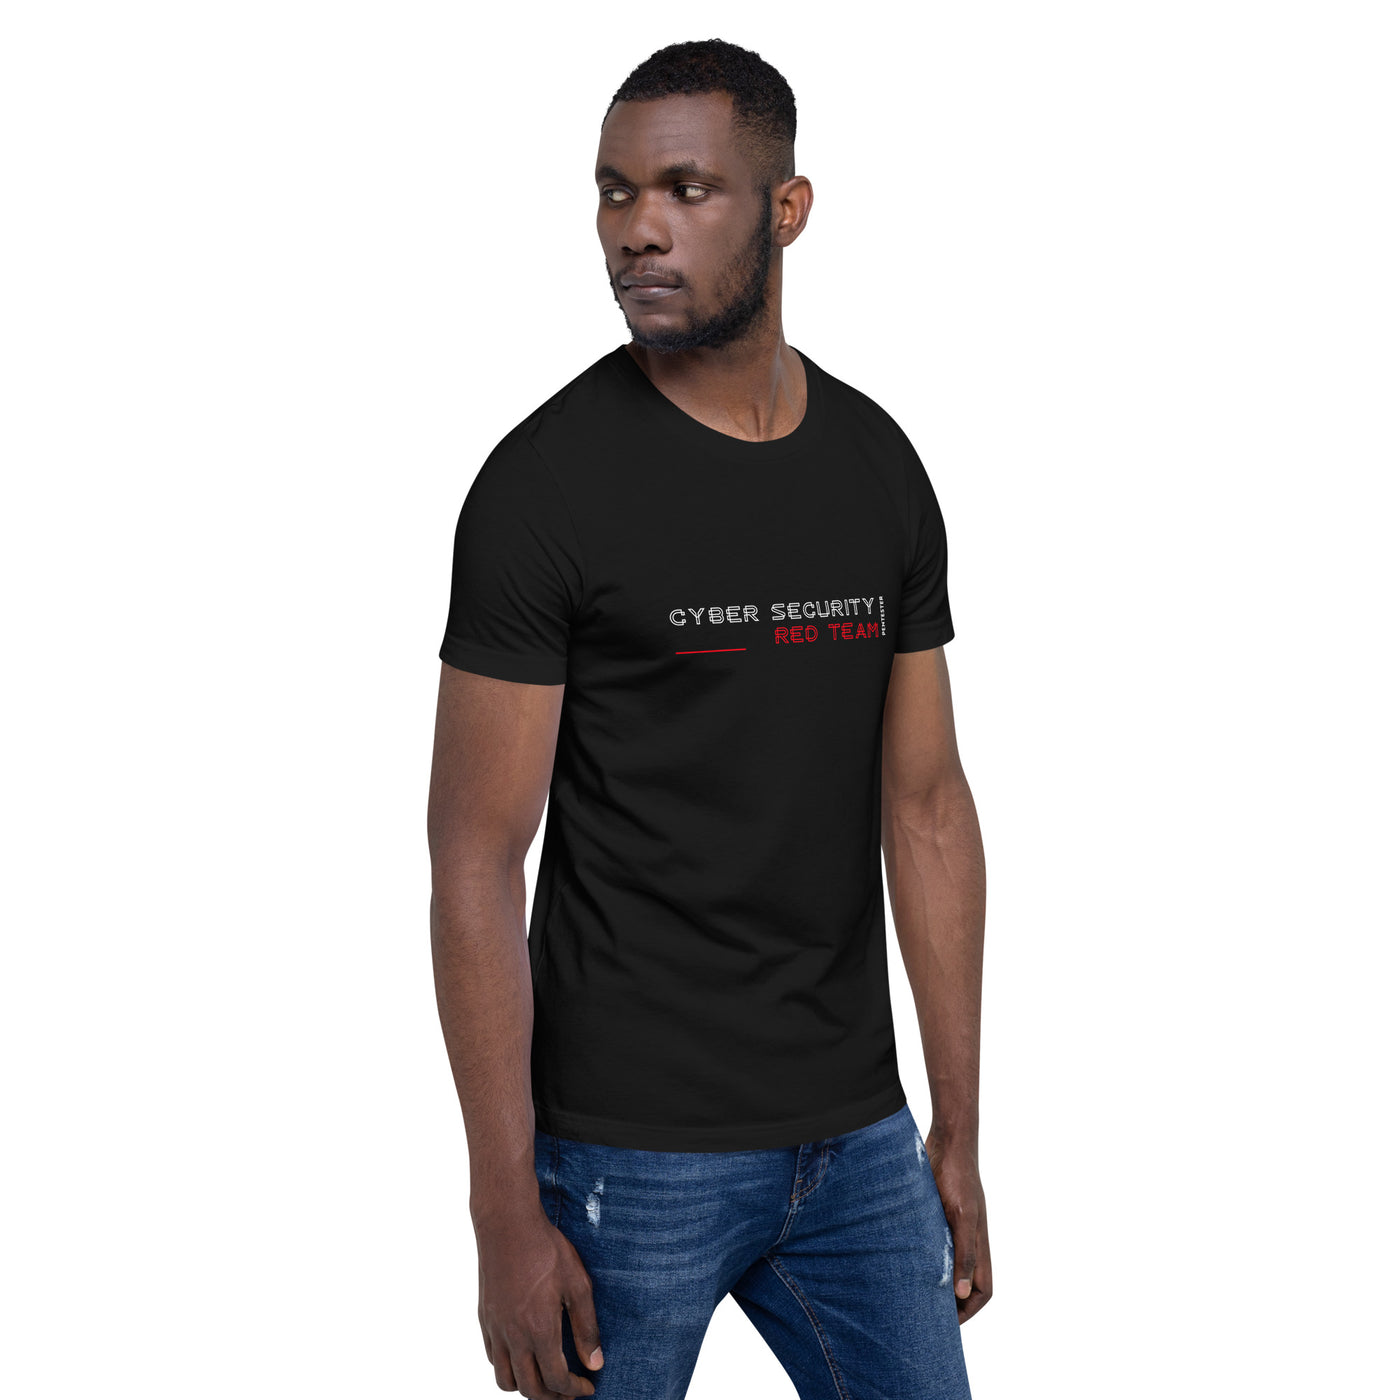 Cyber Security Red Team V2 - Unisex t-shirt